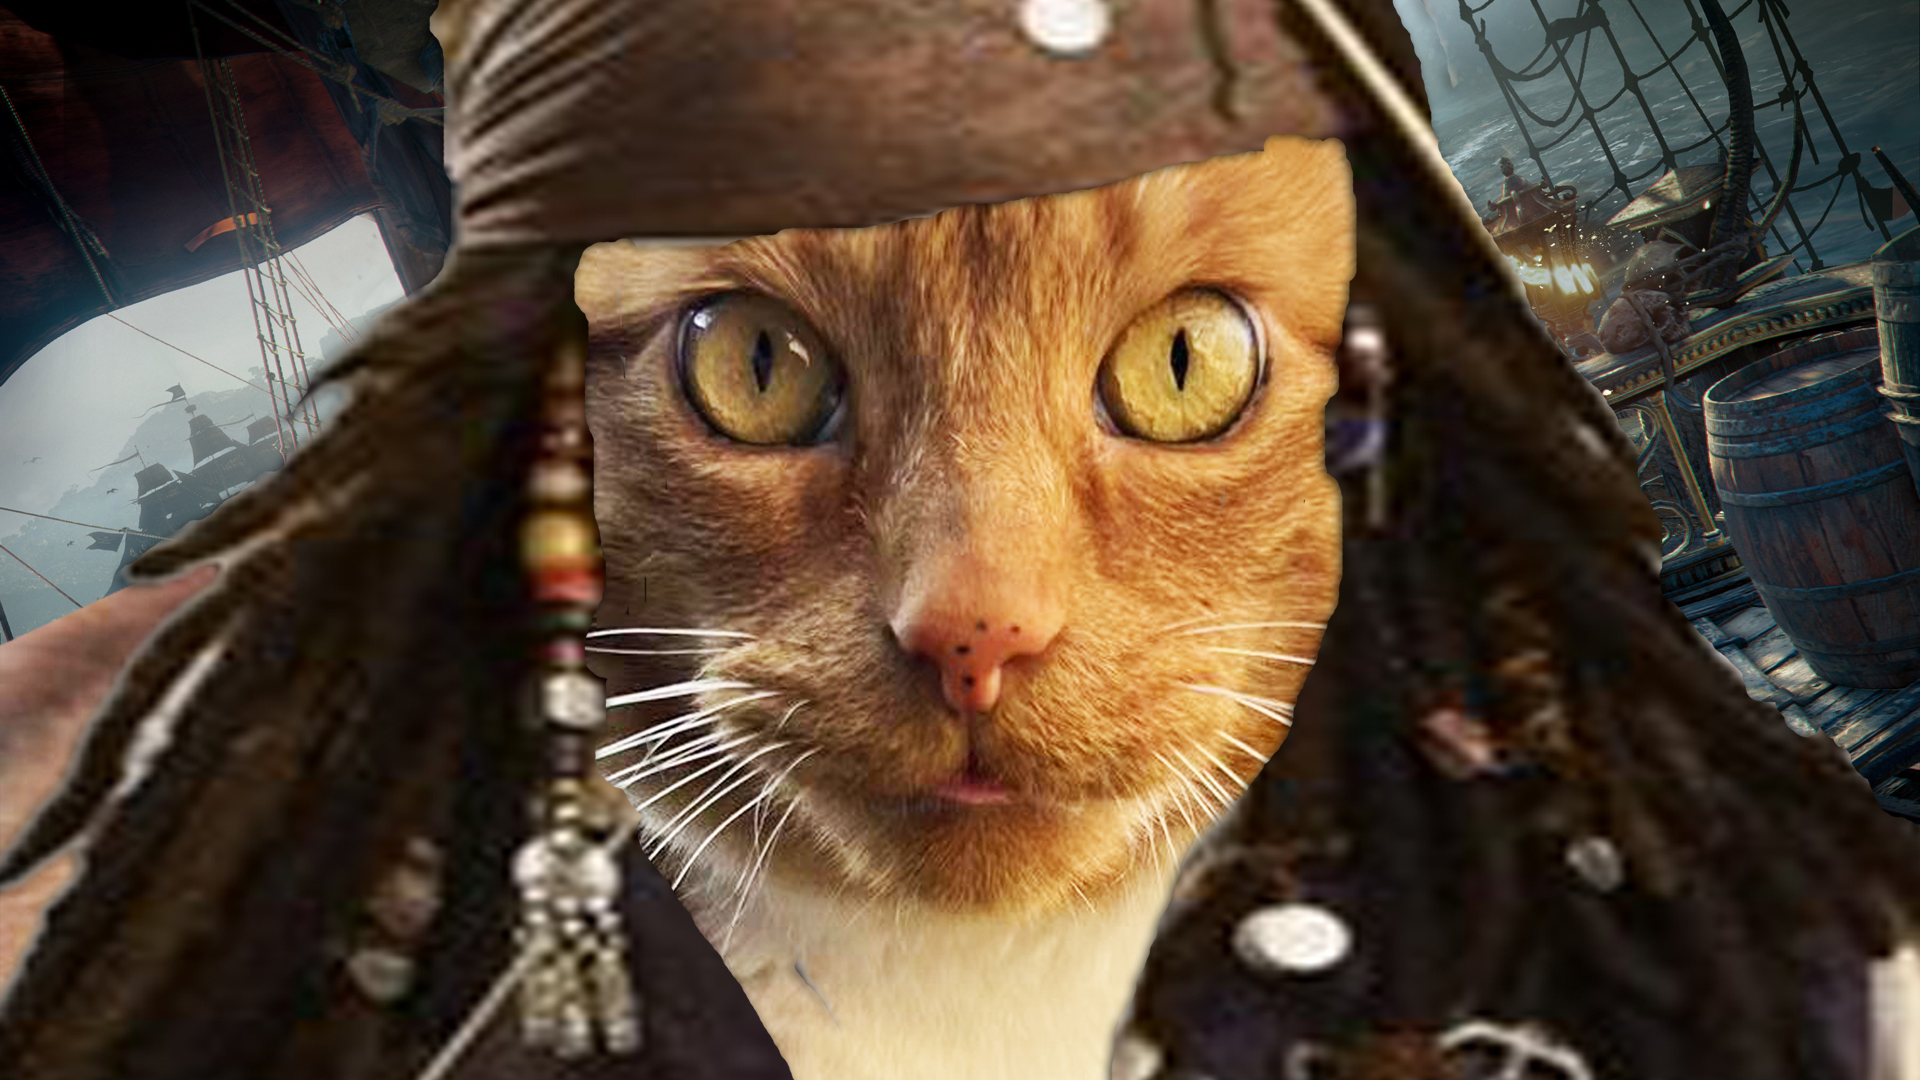 Skull and Bones has pets, including pirate cats